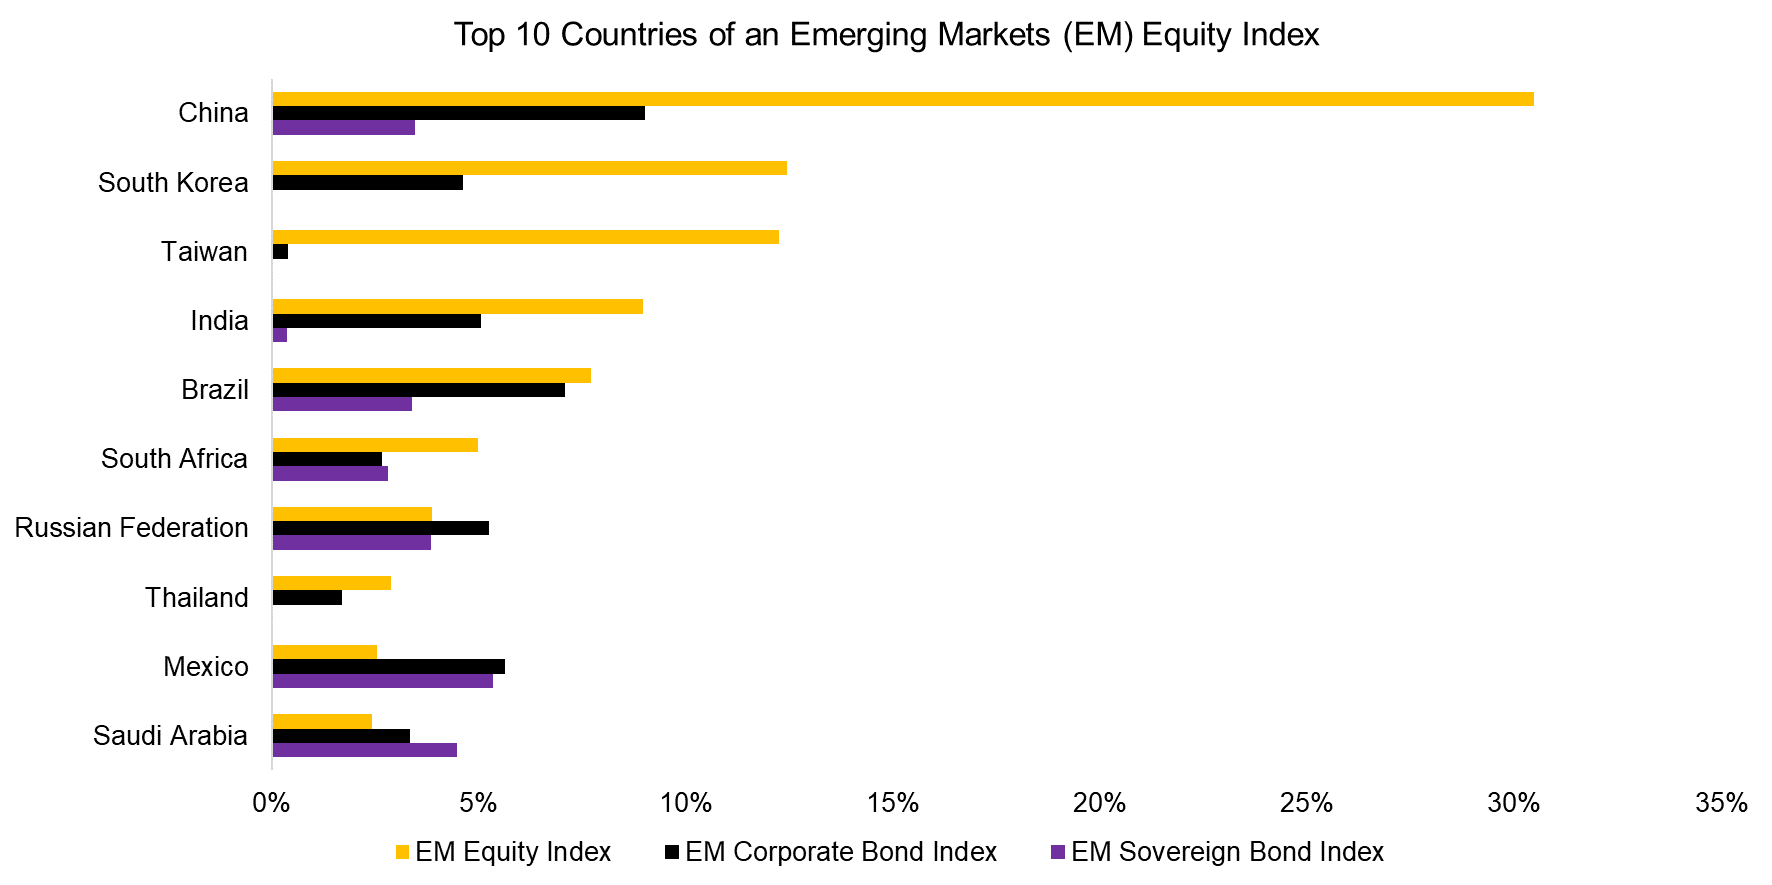 Top 10 Countries of an Emerging Markets (EM) Equity Index